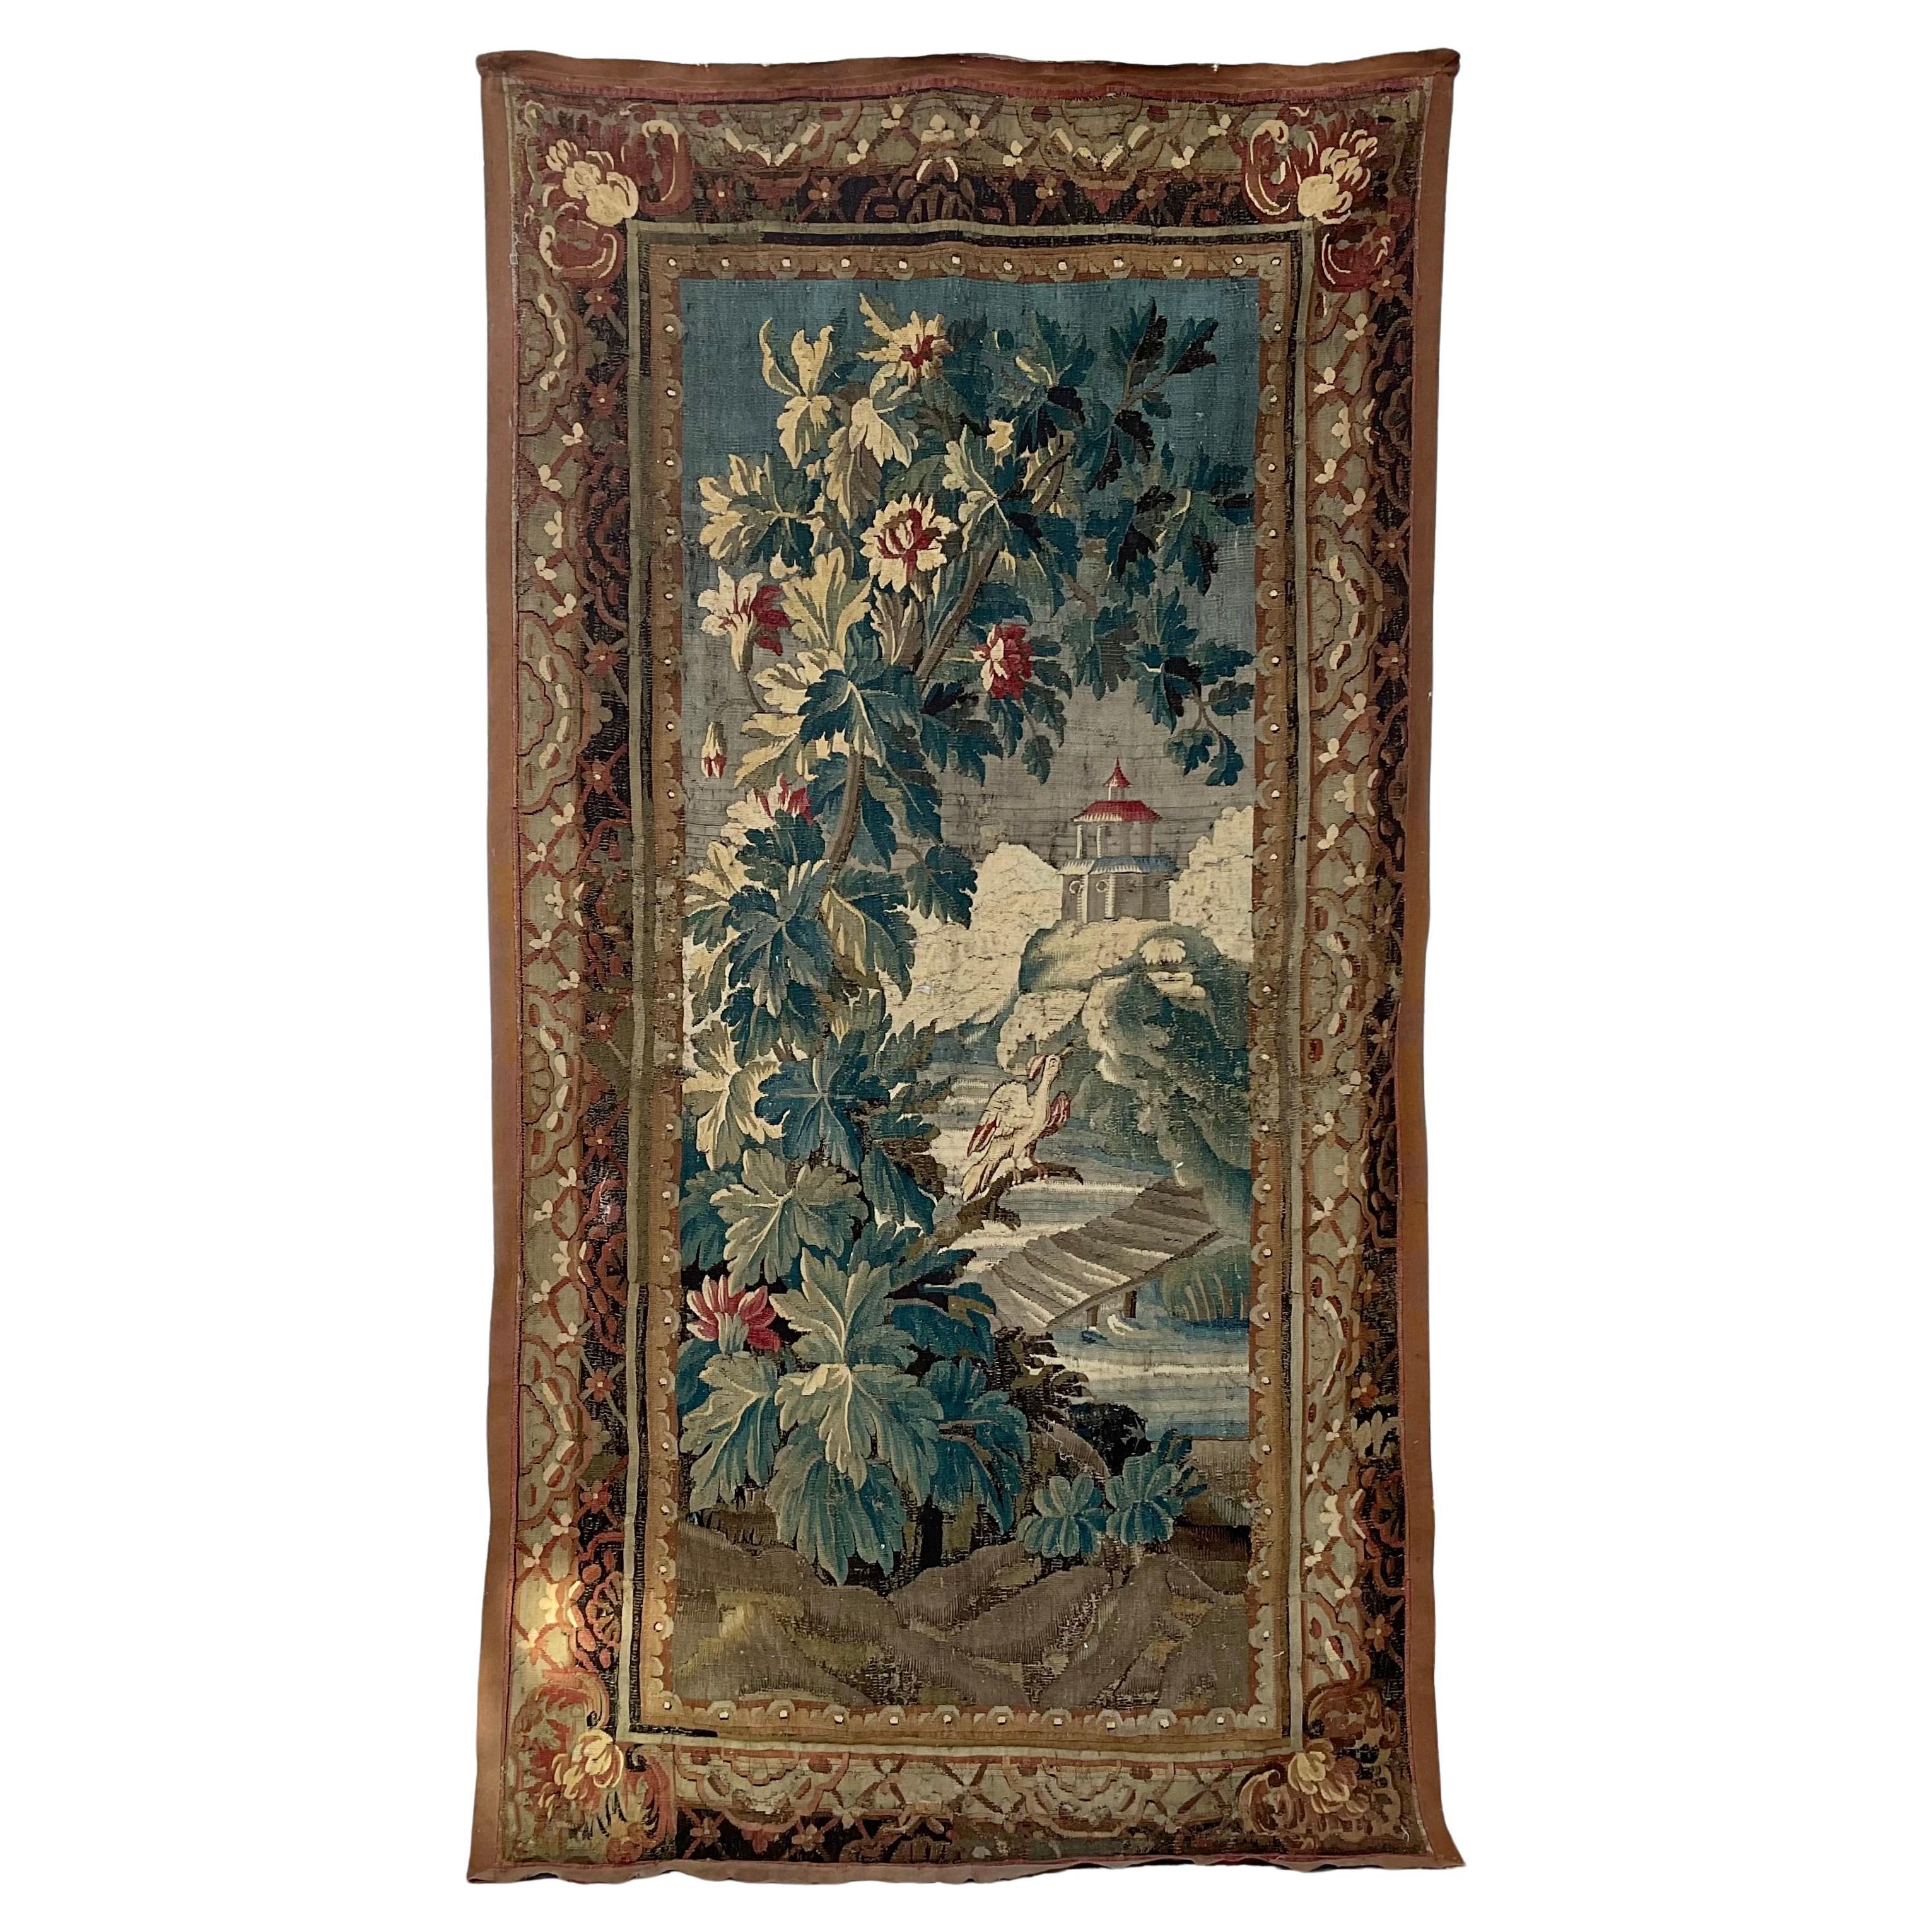 An antique 18th century handwoven French tapestry. 
This beautiful antique tapestry was woven in Aubusson, France, circa 1760. Rectangular in shape, the colorful piece depicts an outdoor scene with a large bird in the center, a bridge leading to